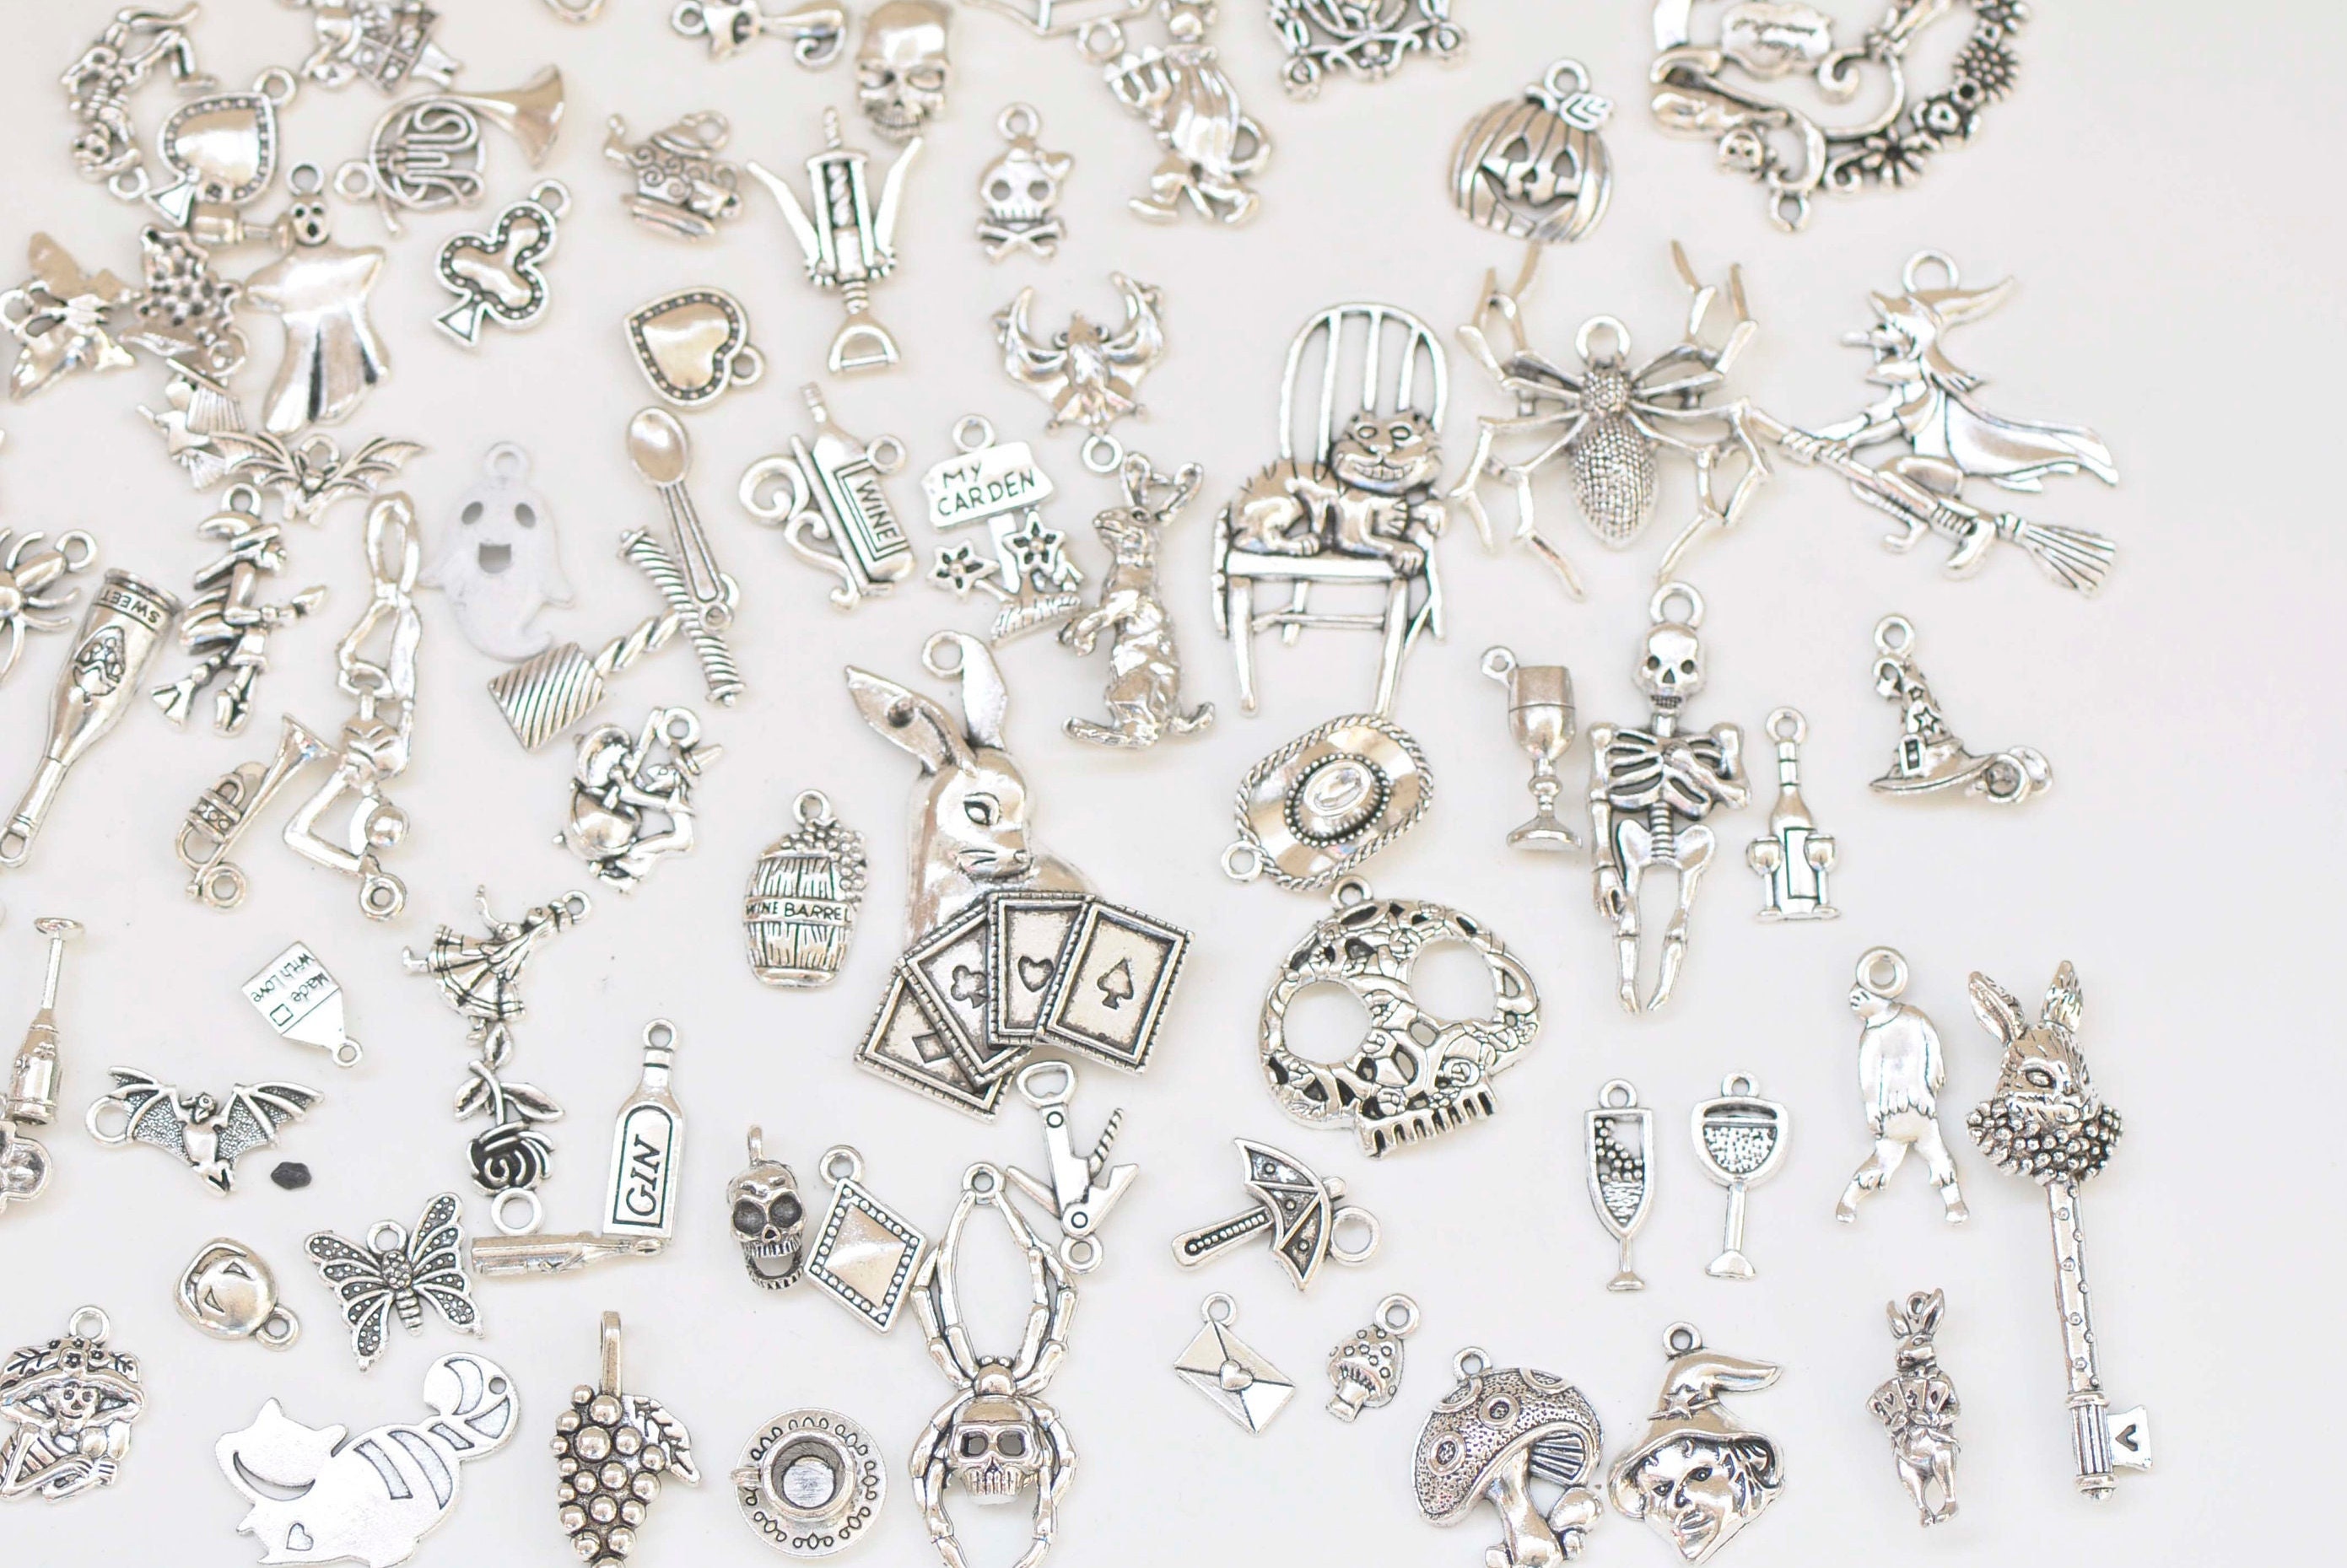 MIXED PACK OF 10 ALICE IN WONDERLAND TIBETAN  SILVER CHARMS/PENDANT,CRAFT MAKING 